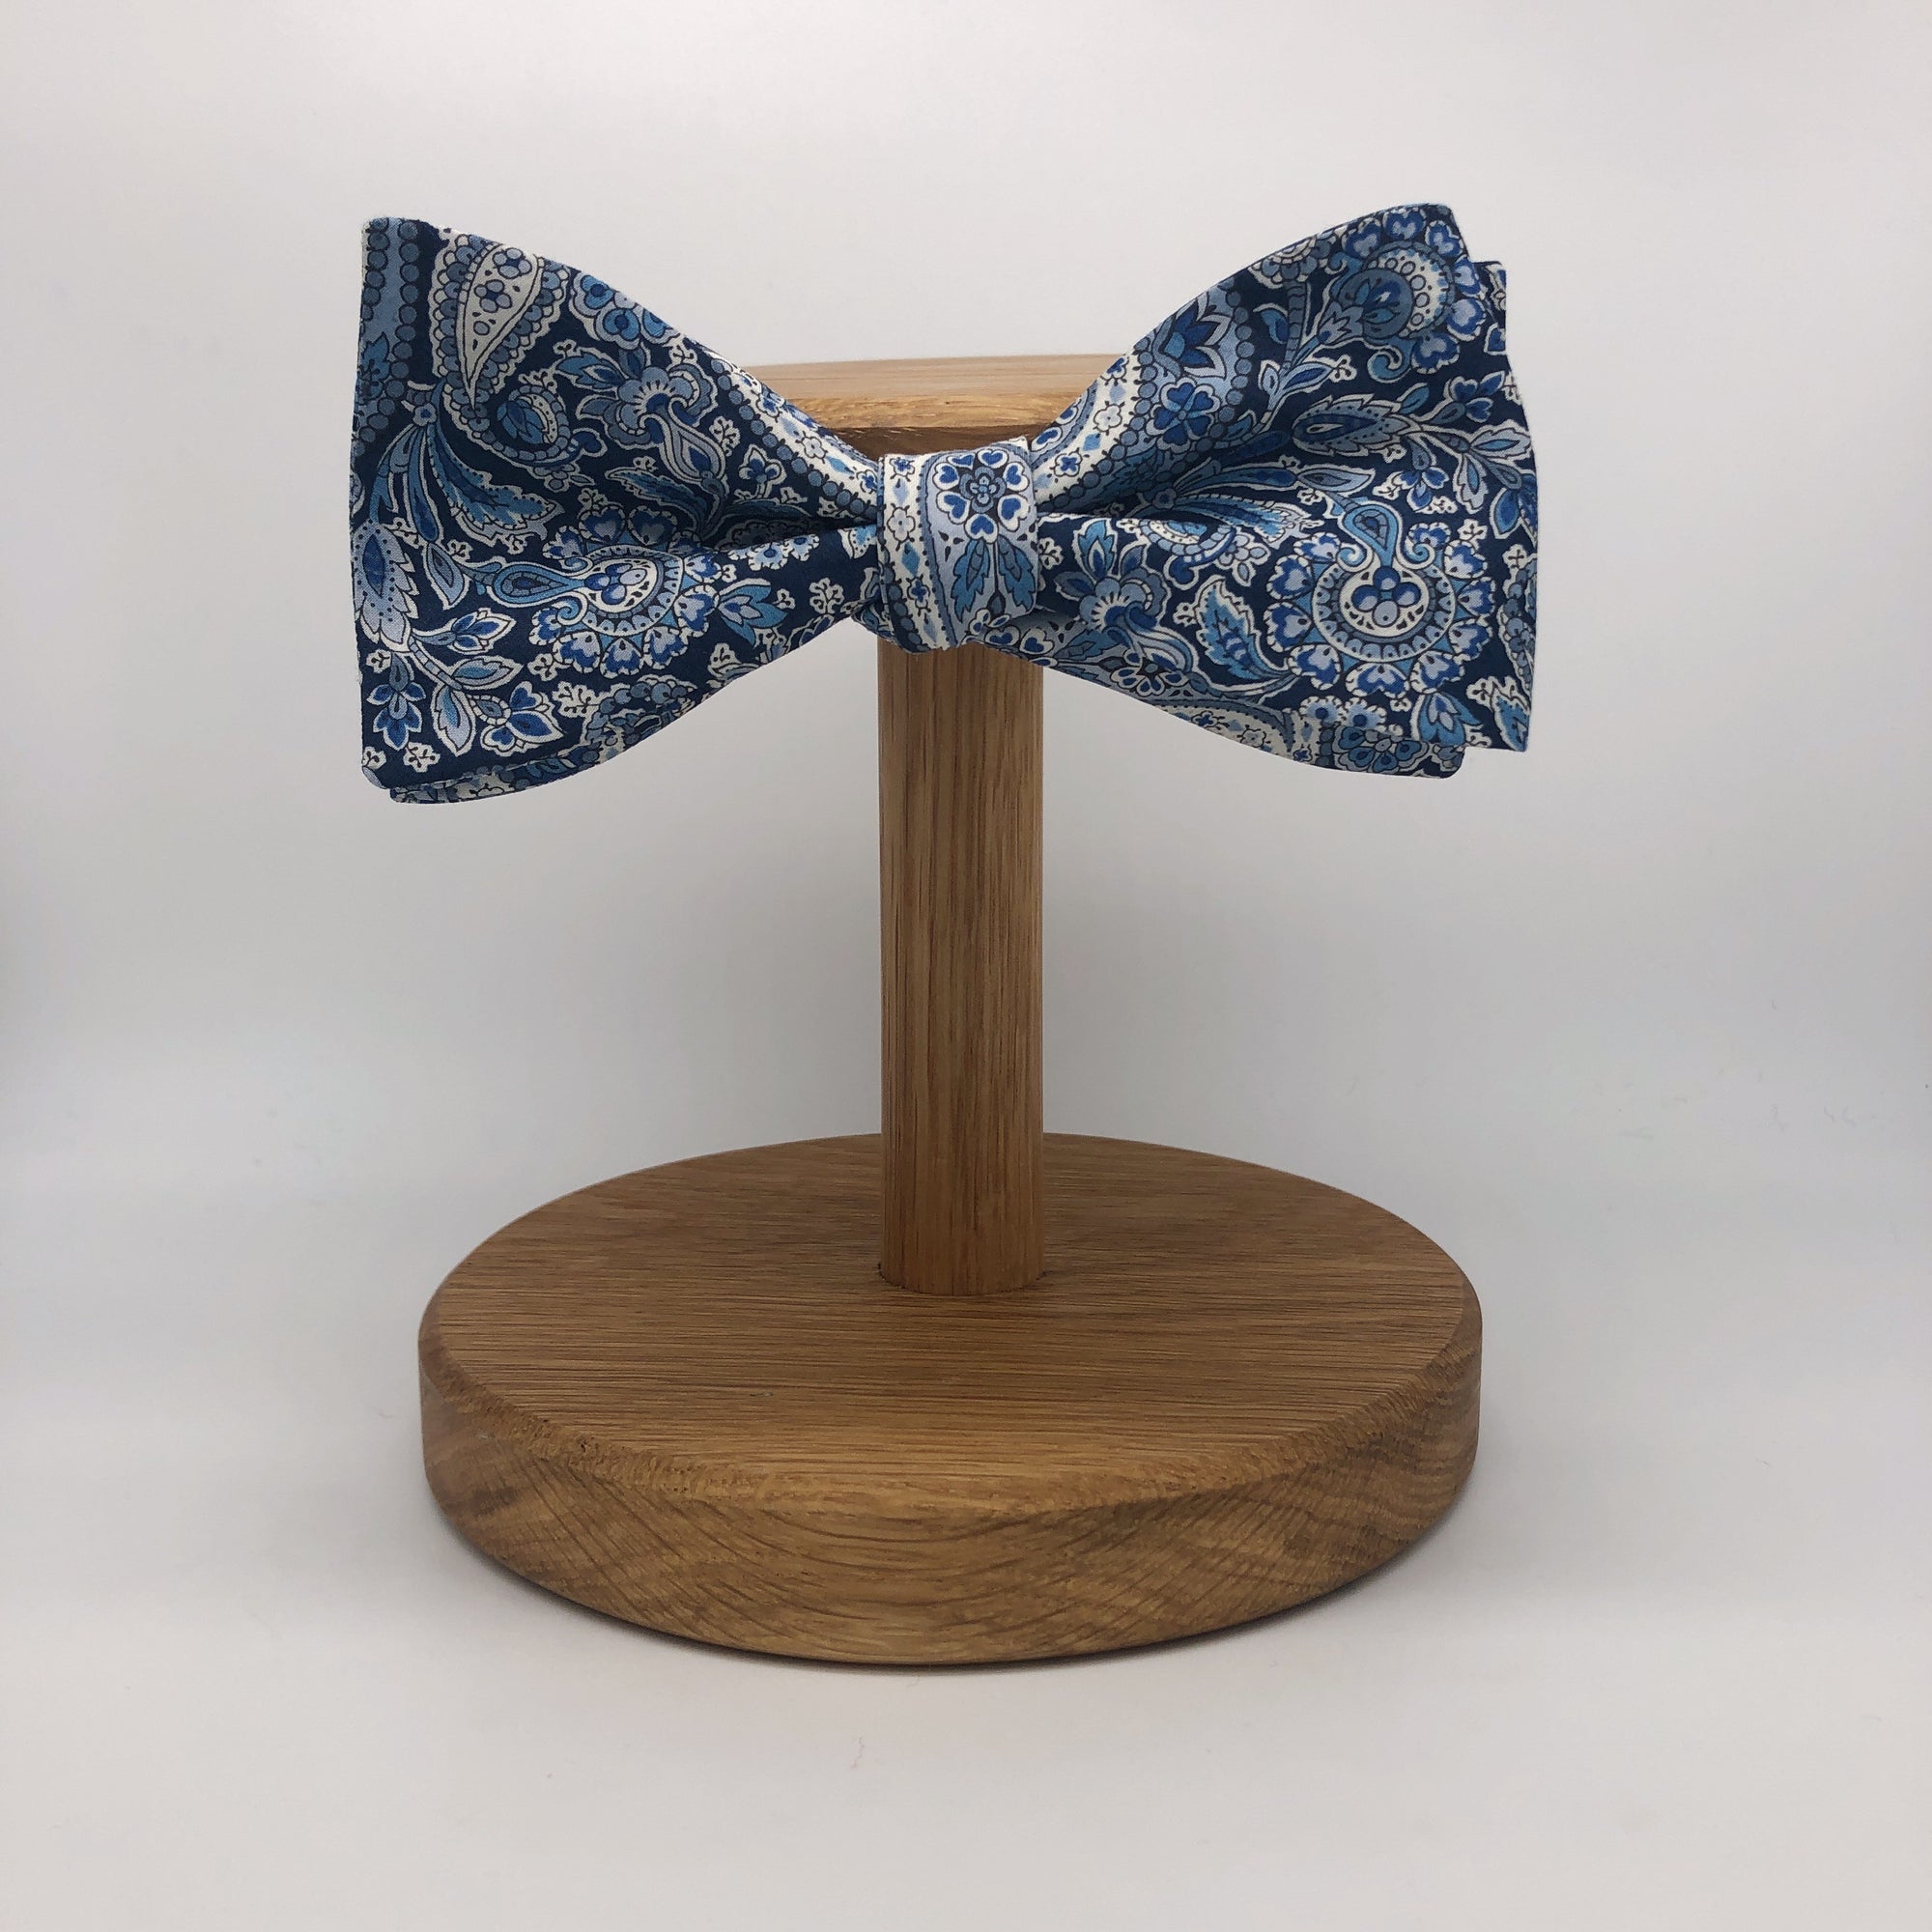 Liberty of London Self-Tie Bow Tie in Navy Paisley by the Belfast Bow Company